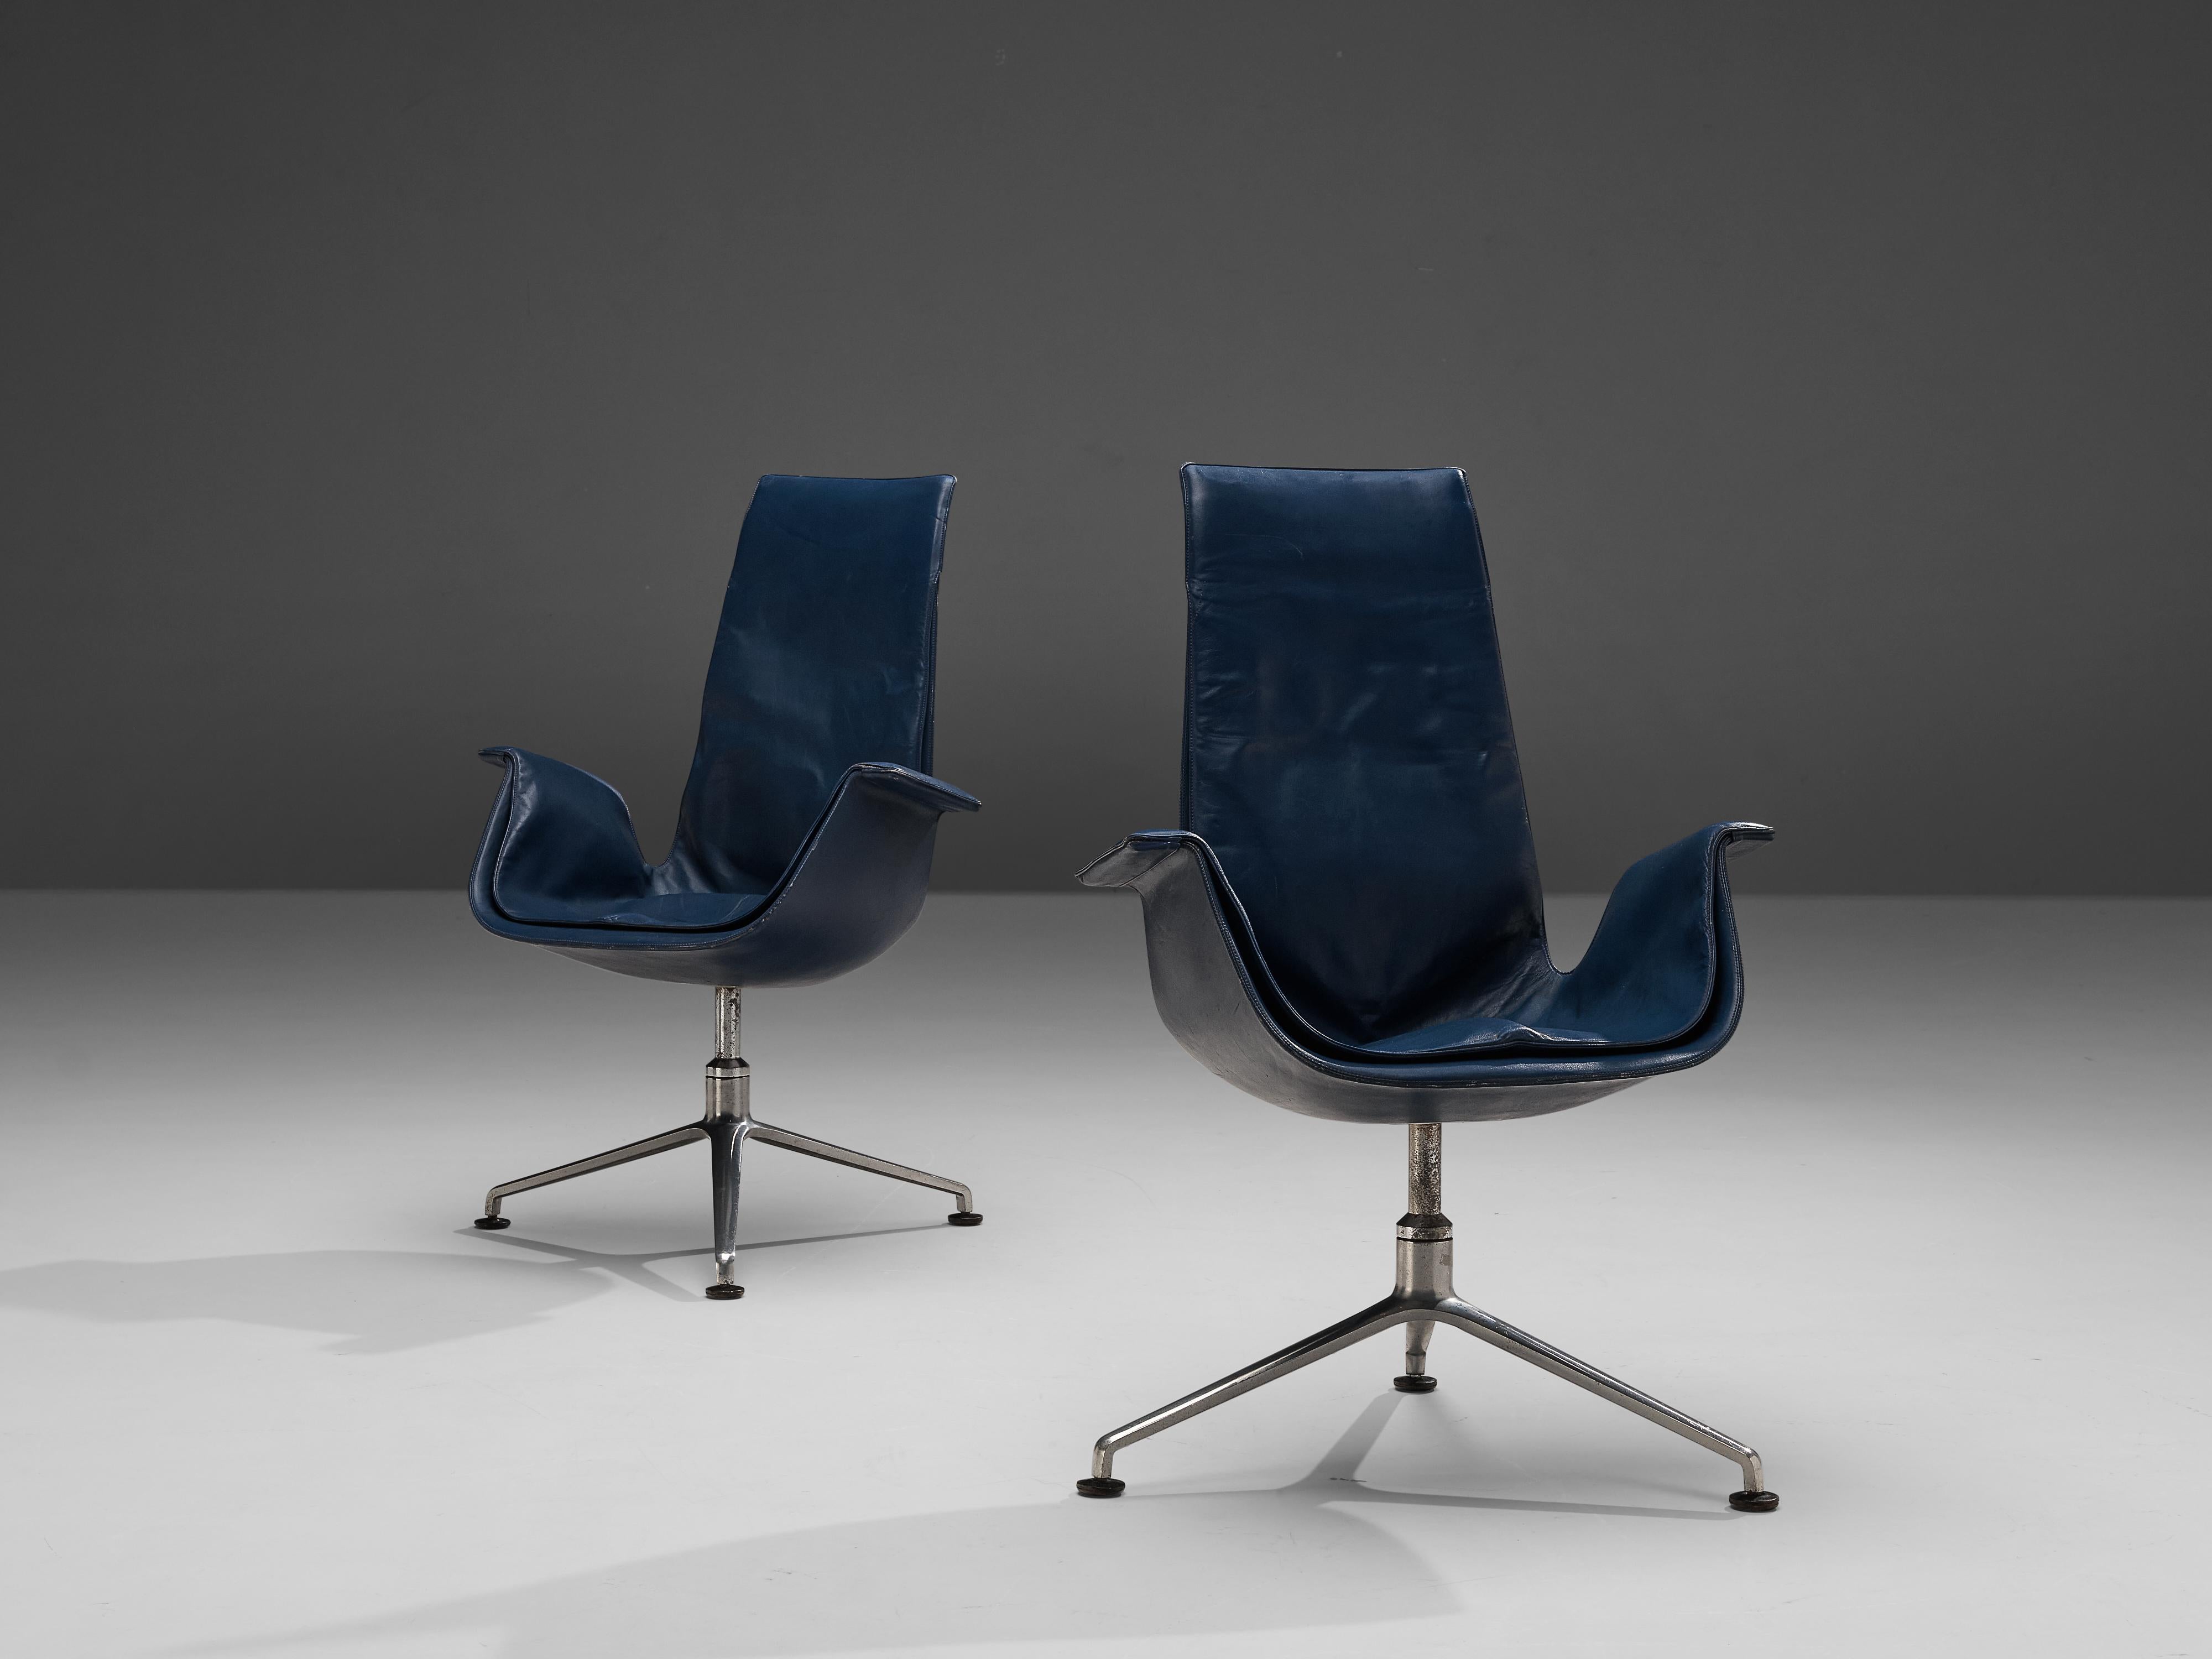 Fabricius & Kastholm Pair of Swivel Chairs Model 'FK 6725' in Blue Leather 1